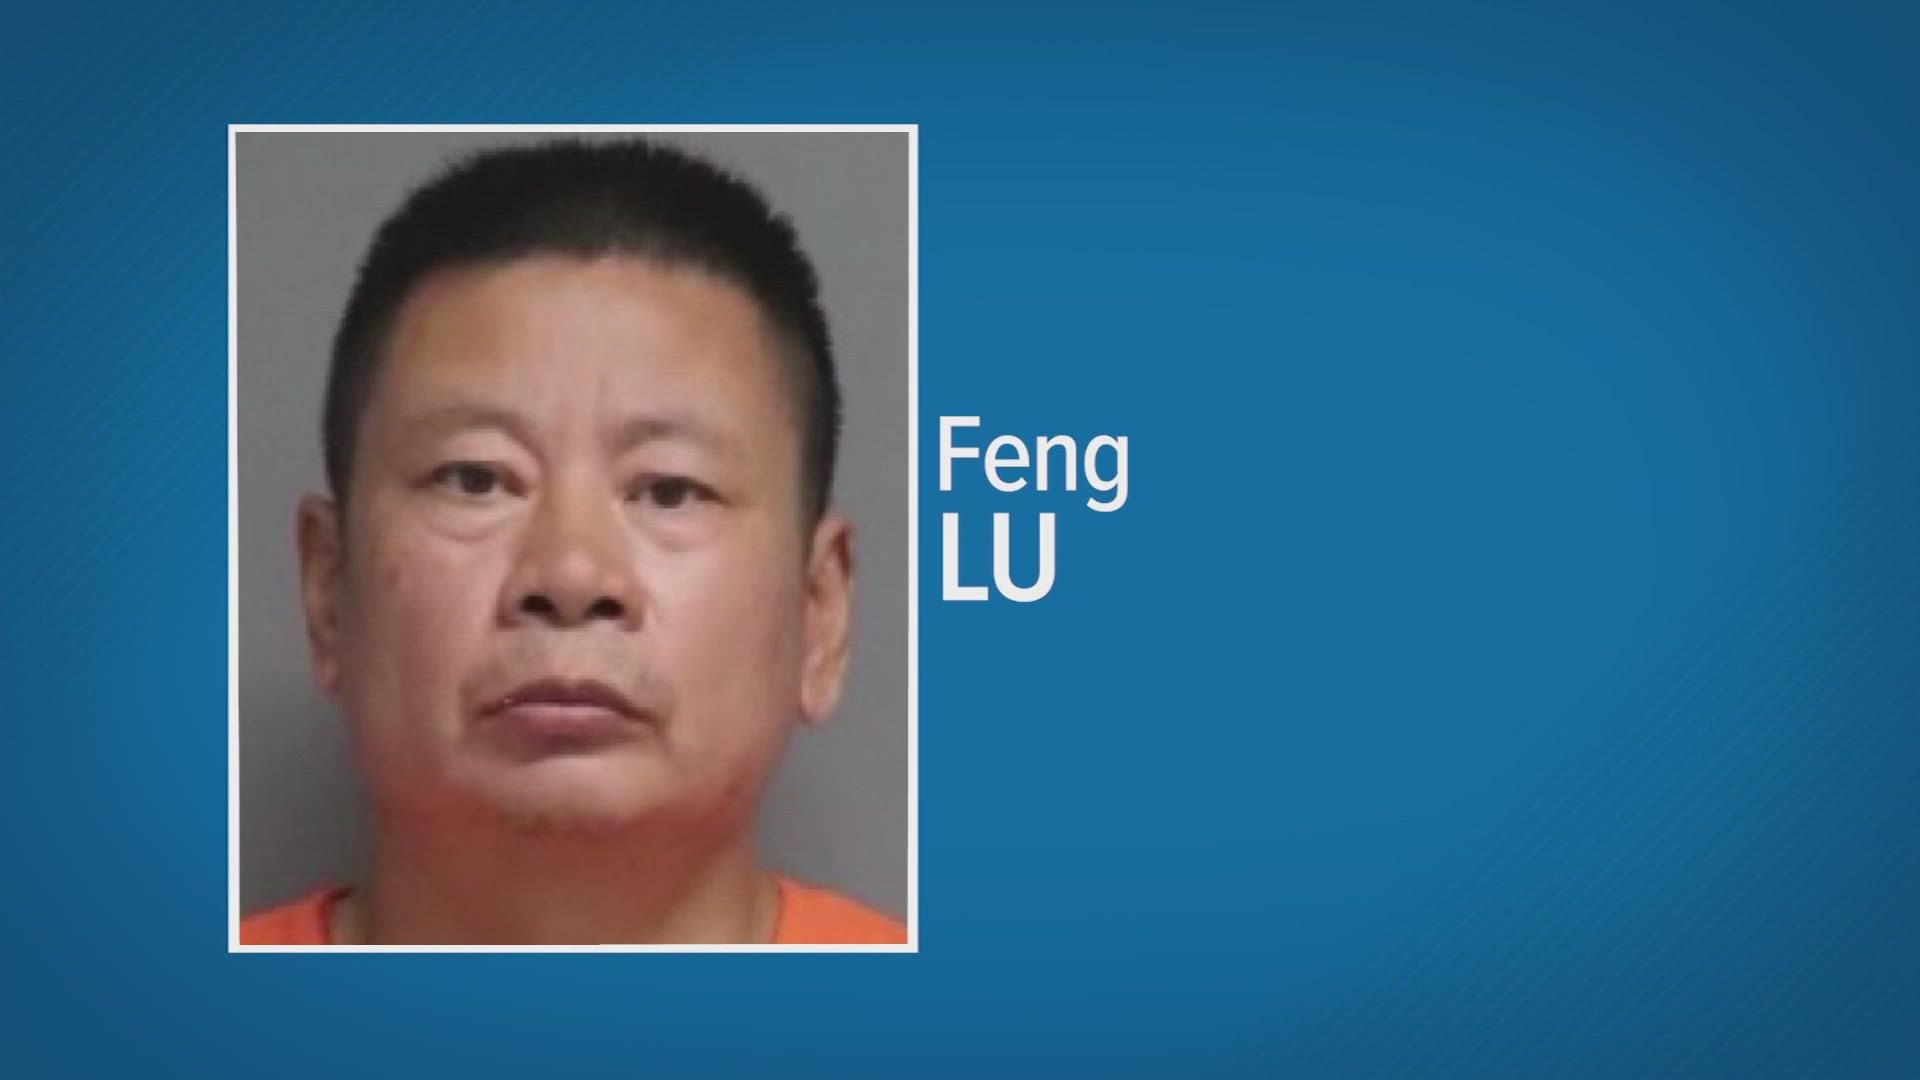 Feng Lu, 58, is accused of shooting and killing four members of the Sun family at a Cypress-area home in 2014.